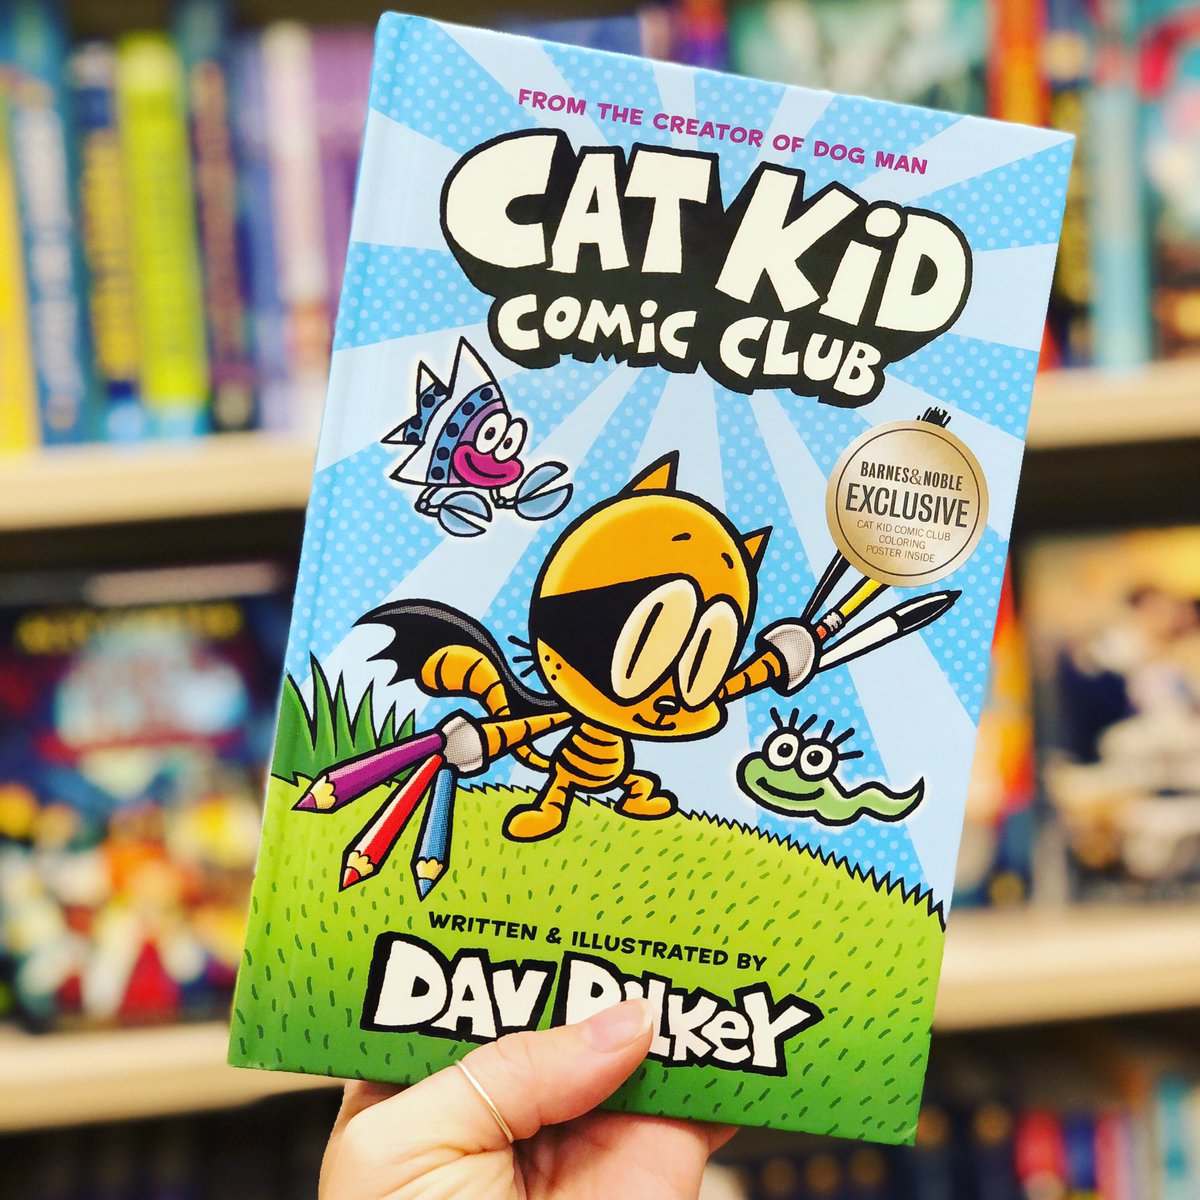 Looking for a gift for your Dog Man fan? Cat Kid Comic Club by Dav Pilkey  is our new favorite! 
#bnbuzz #barnesandnoble #bnkids #bookswelove #mkekids #mkemom #dogman #catkid #davpilkey #saturday #wereccomend #bookworms #raisingreaders